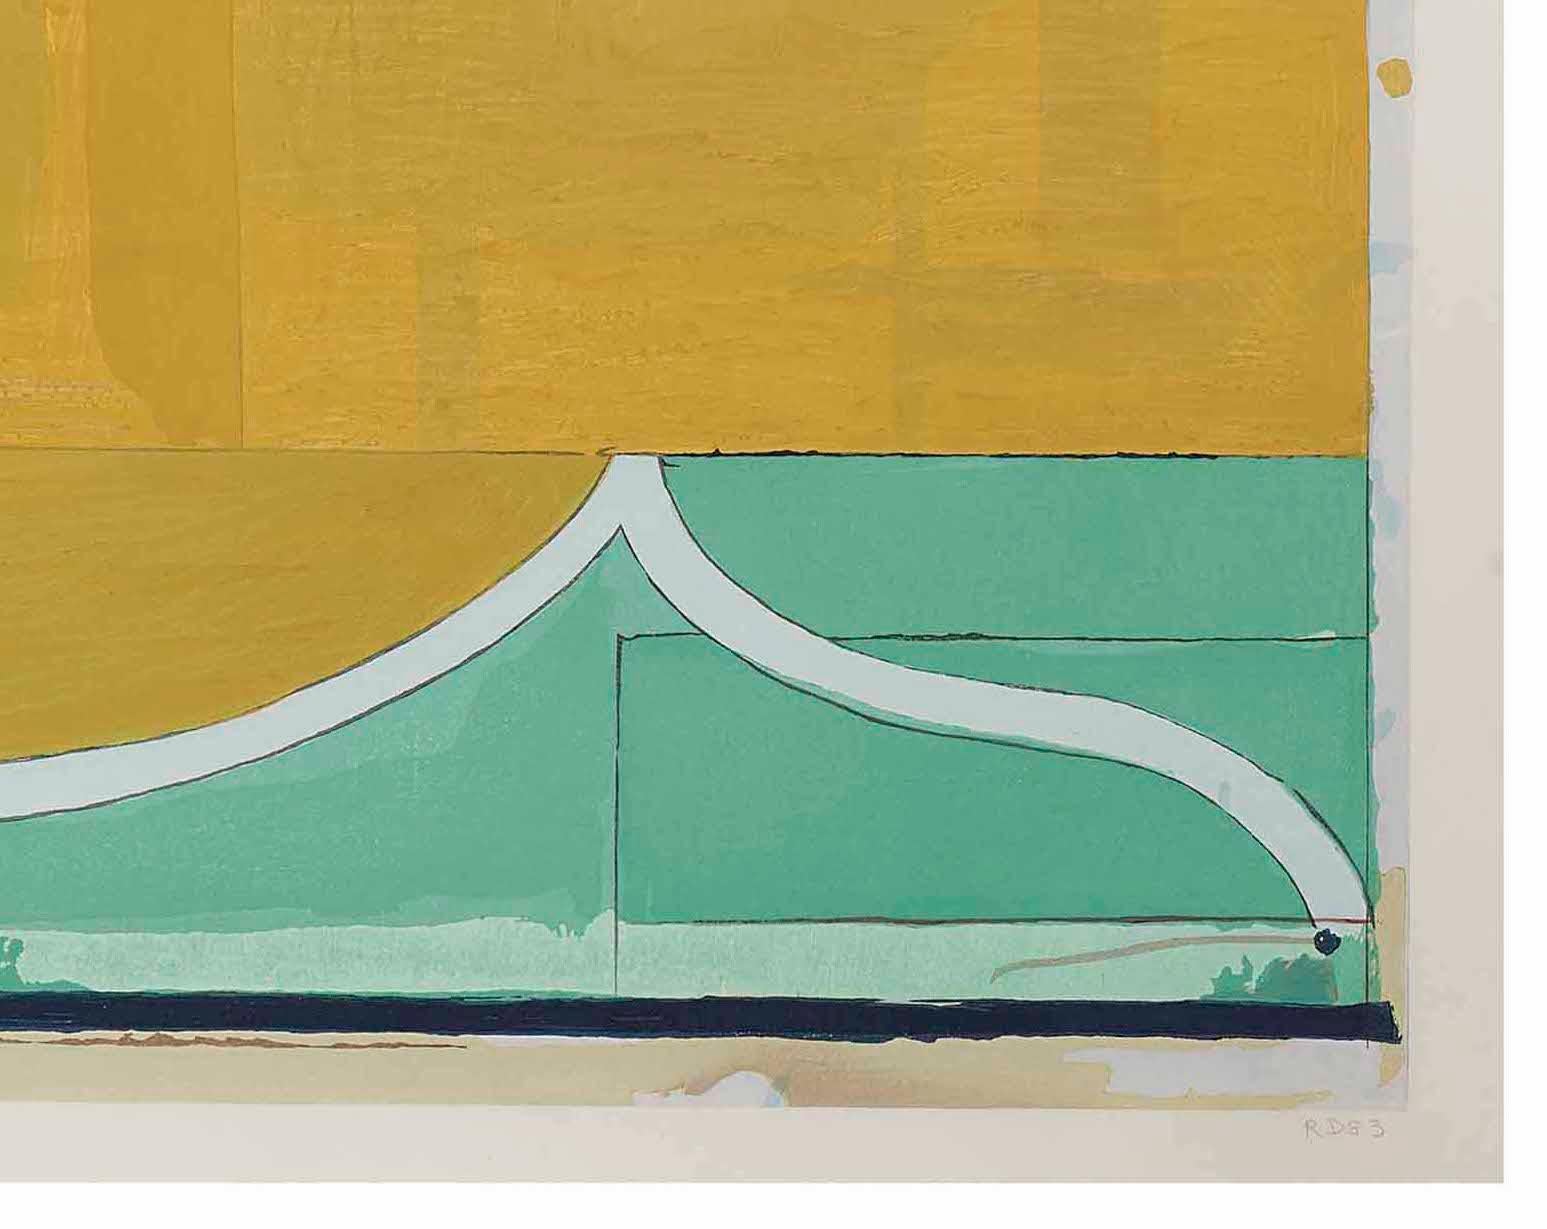 Richard Diebenkorn's 'Ochre' created in 1983 is a woodcut in colors on Mitsumata paper. It is signed in pencil and numbered 64/200. Please contact us with any further questions!